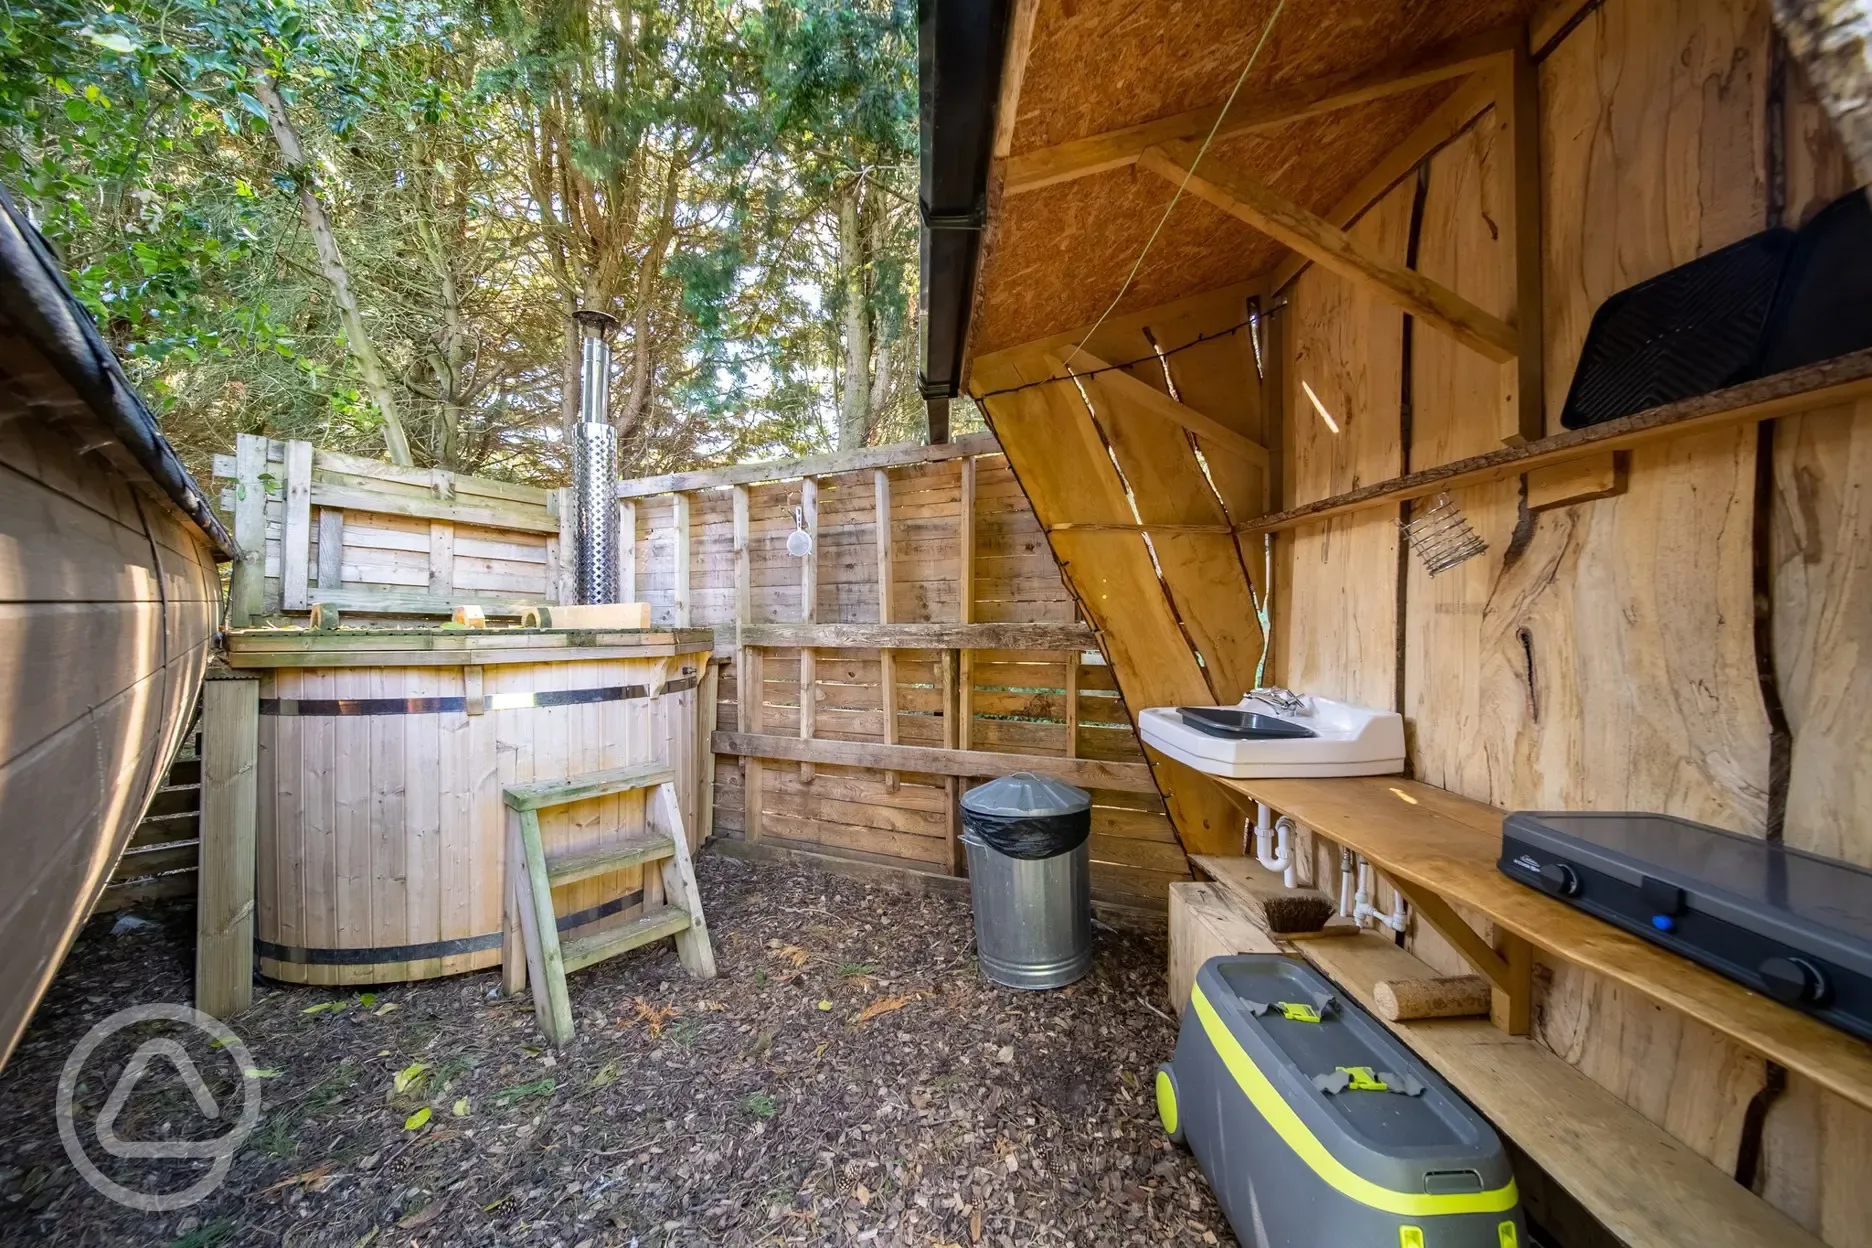 Private kitchen shelter and hot tub